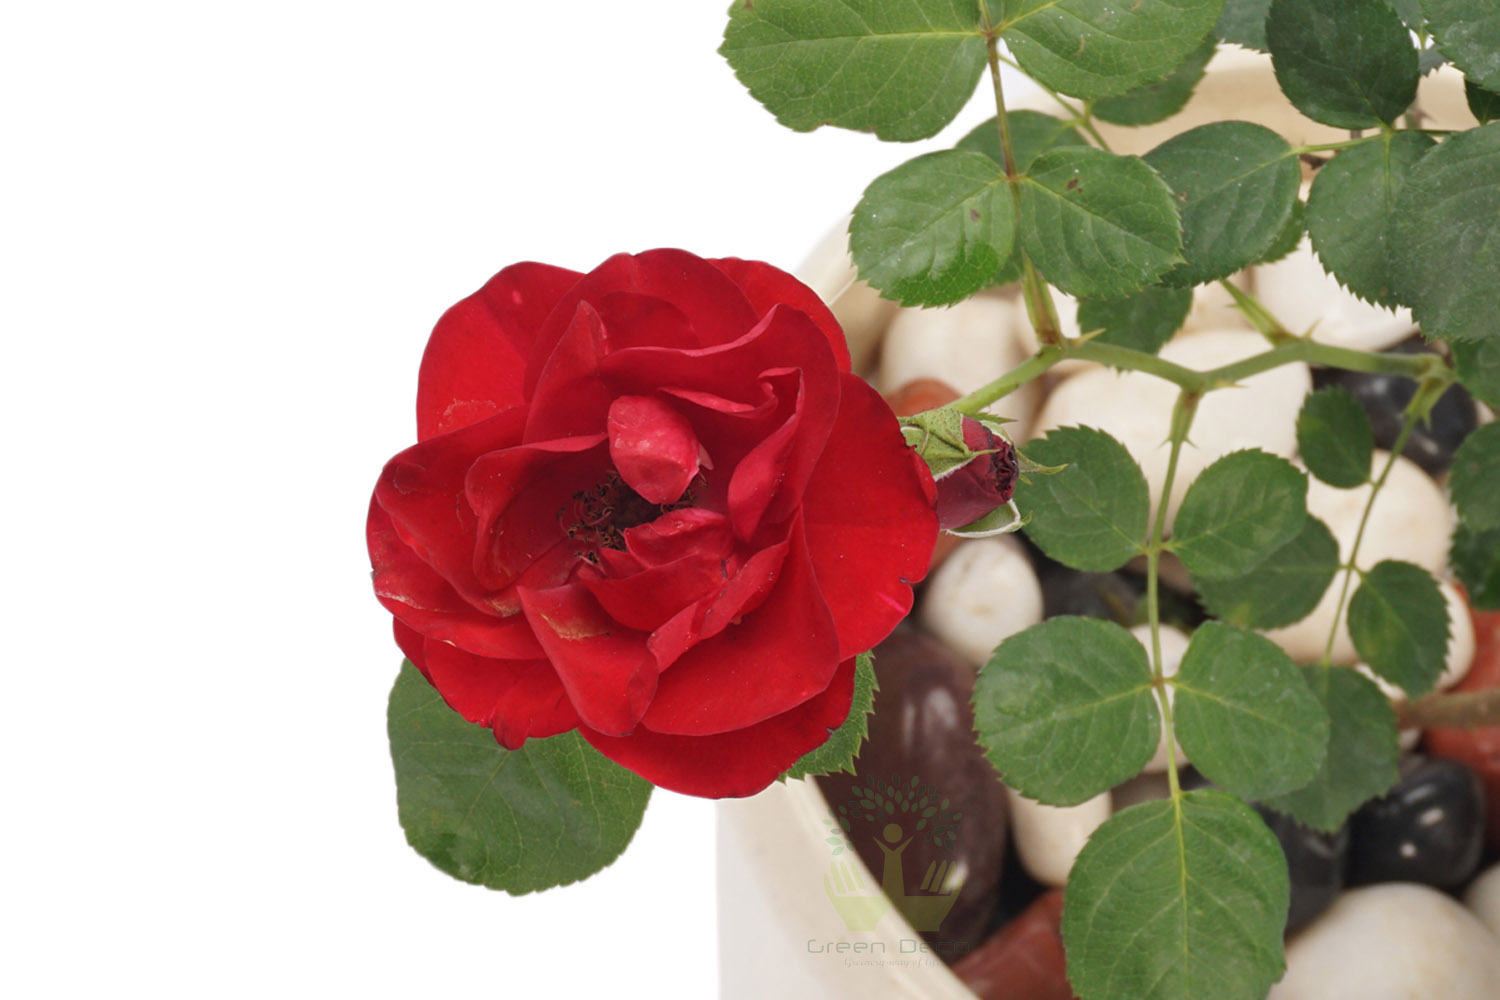 Buy Damascus Scented Rose Plants , White Pots and seeds in Delhi NCR by the best online nursery shop Greendecor.